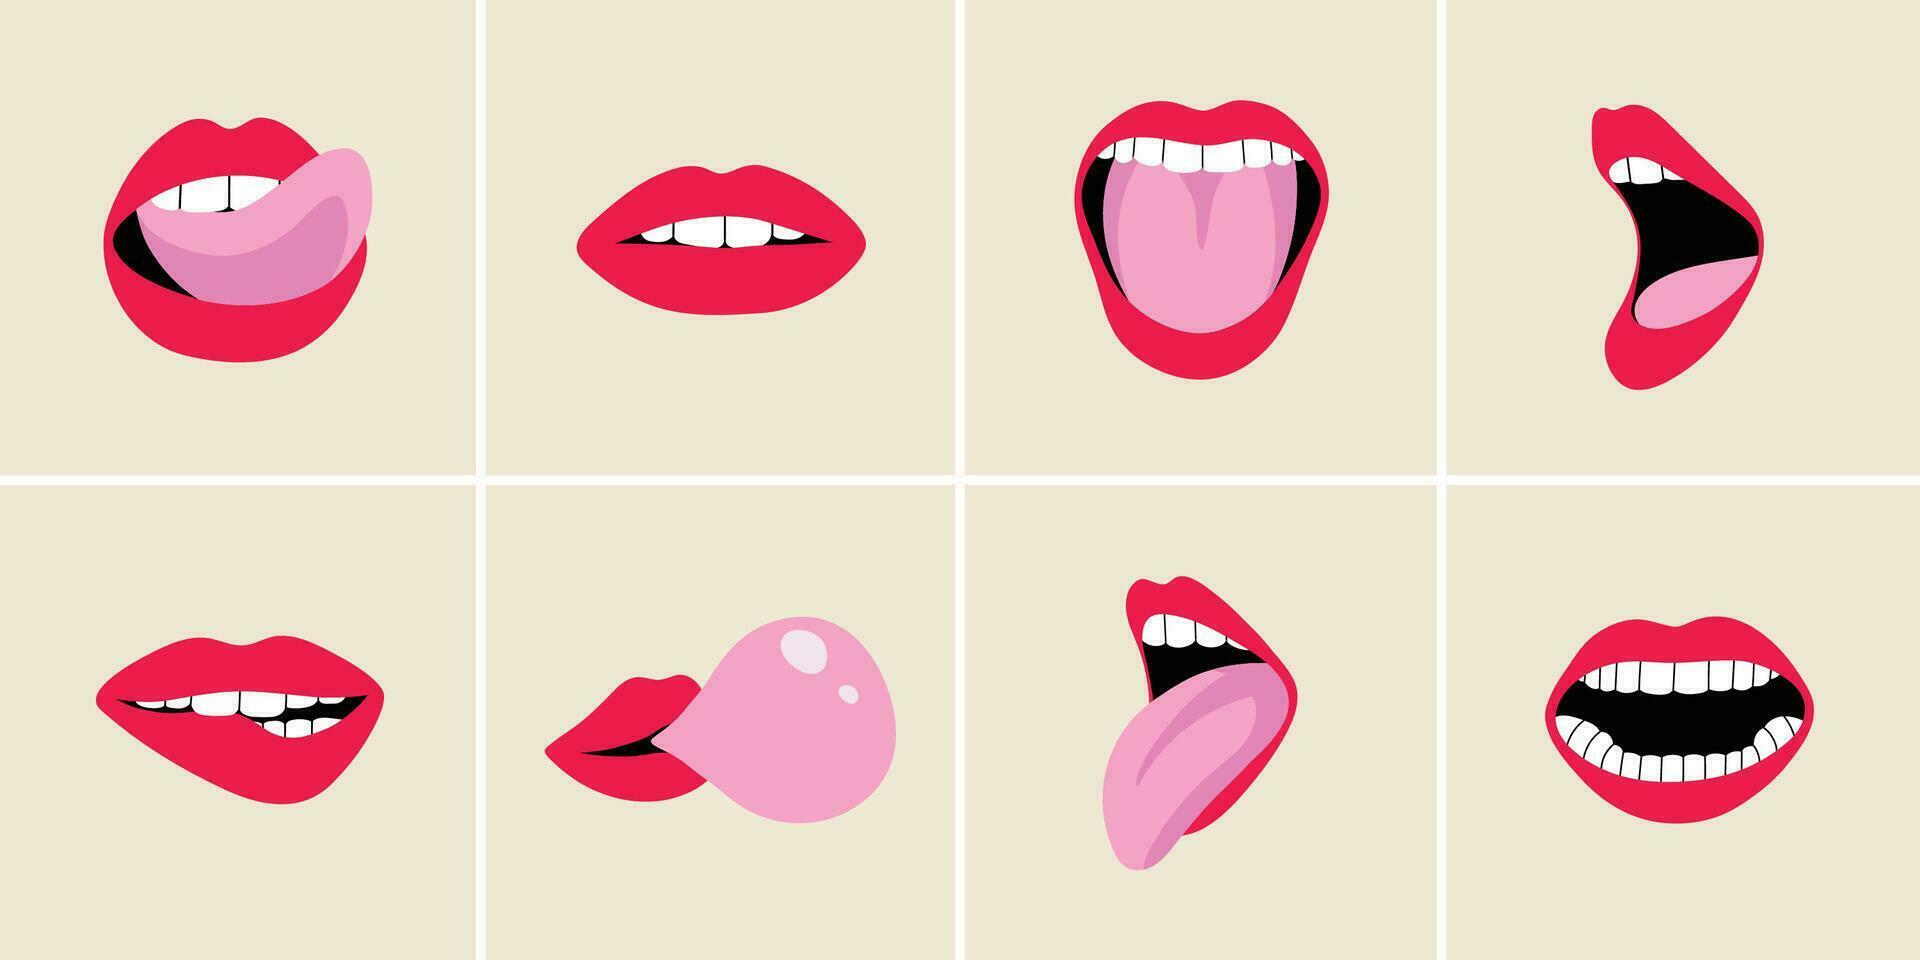 Set of open female human mouth, tongue, teeth in modern flat, line style. Hand drawn vector illustration of sexy lips, sticking out, lip biting, scream, passion. Fashion patch, badge, emblem, sticker